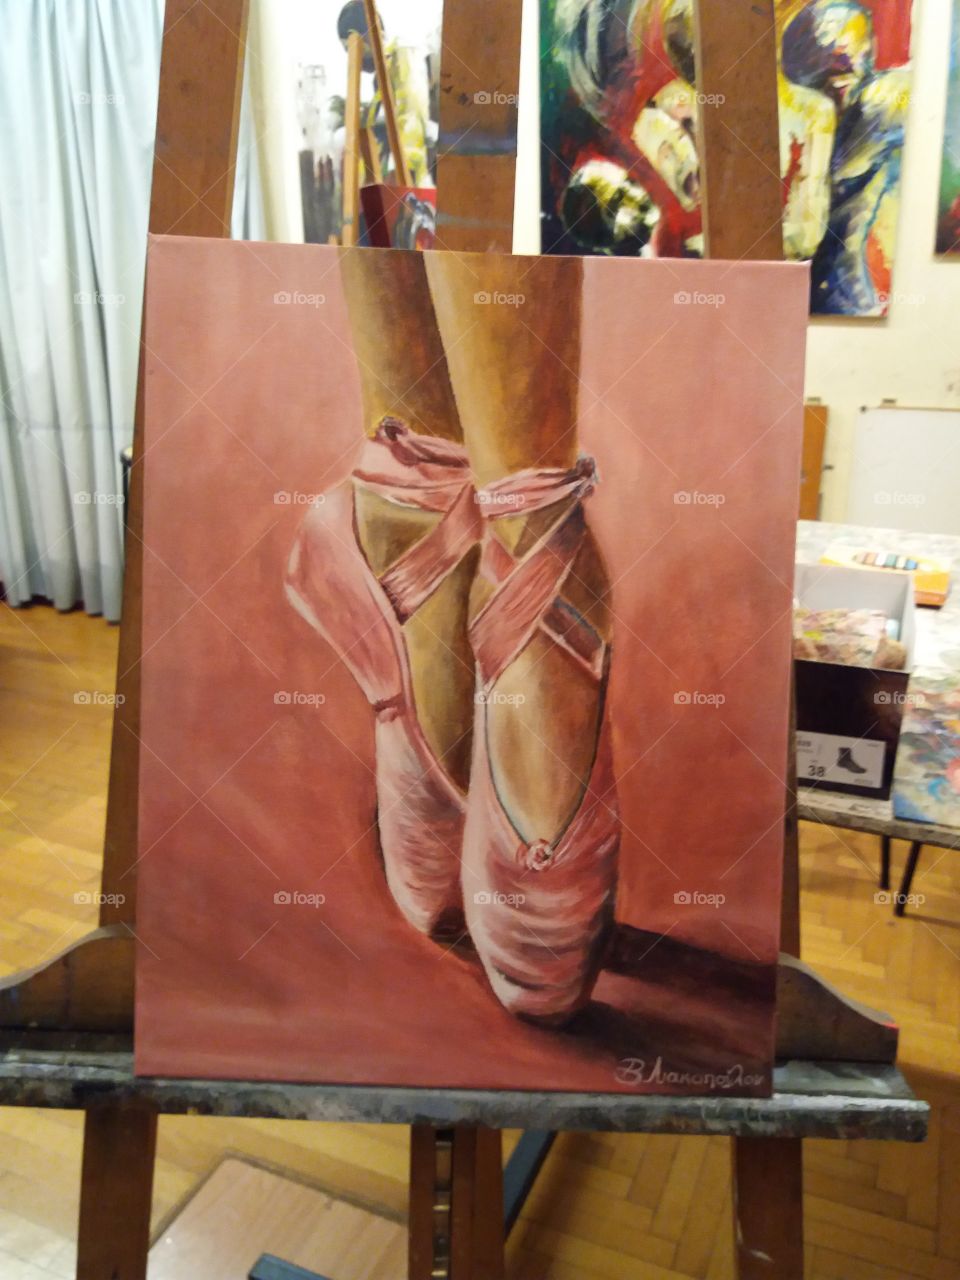 My painting-ballet shoes